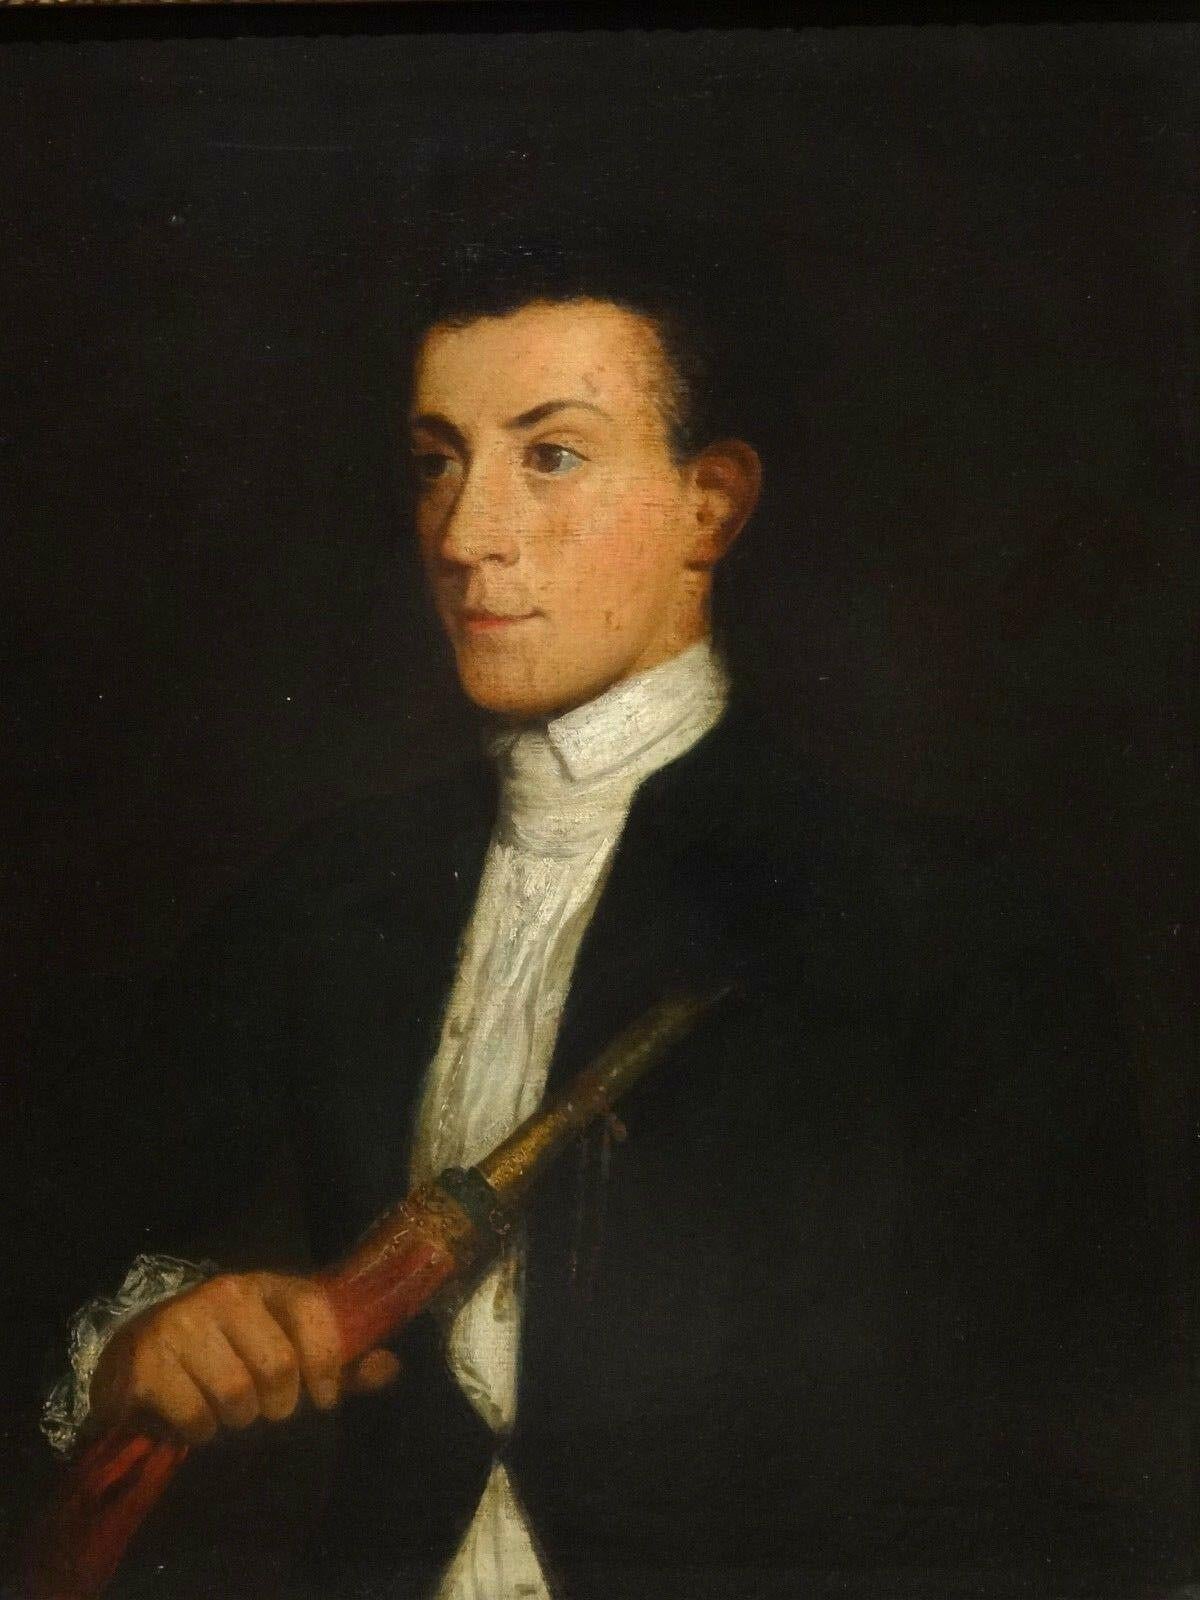 Portrait Of A Zampogna Player, 18th Century  - Painting by Unknown